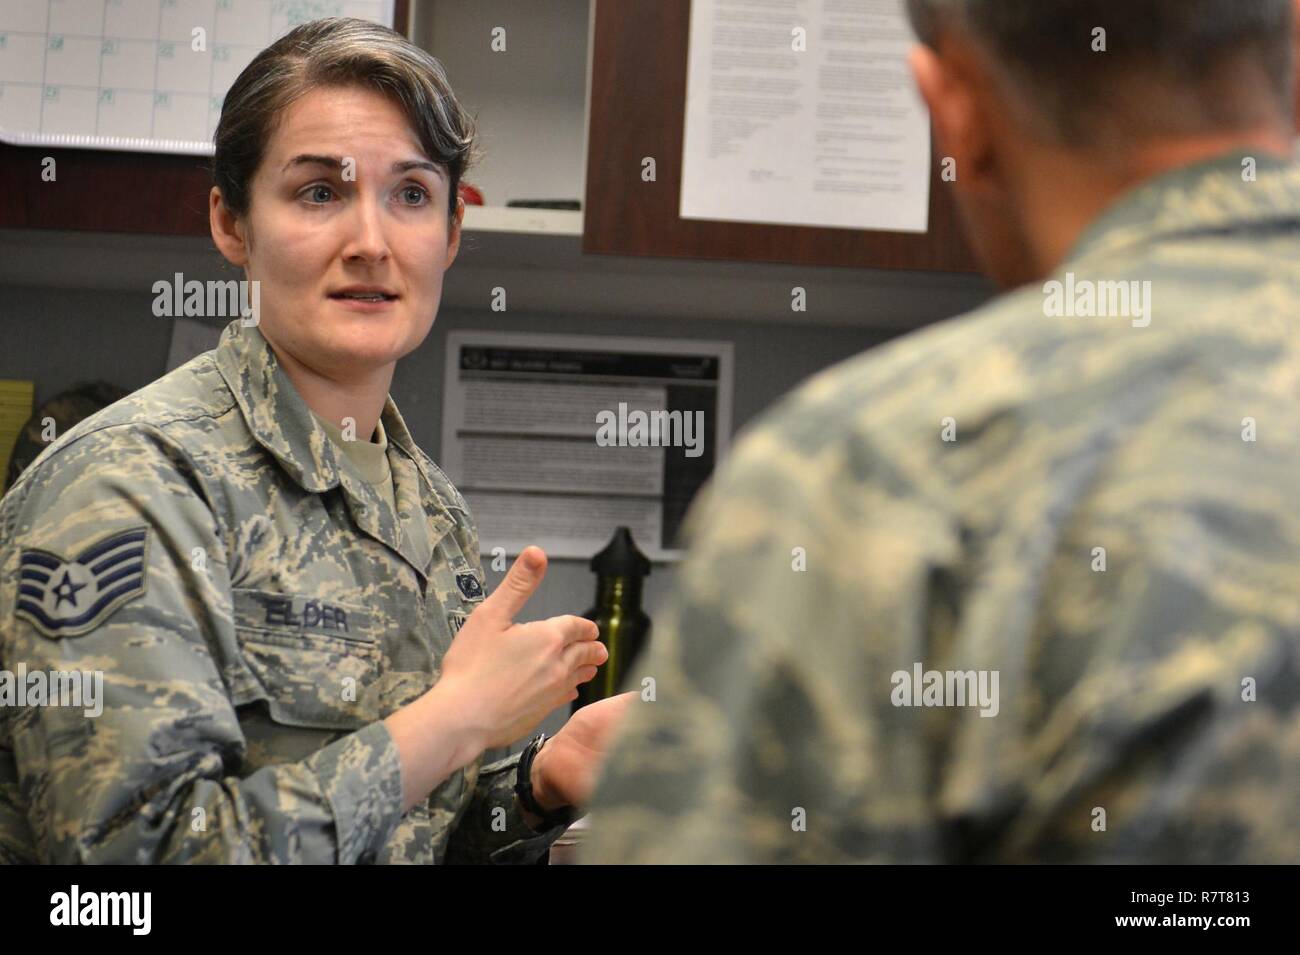 U.S. Air Force Staff Sgt. Molly Elder, 20th Fighter Wing (FW) Public Affairs (PA) broadcast journalist craftsman, speaks with an Airman about a project at Shaw Air Force Base, S.C., March 21, 2017. Before any product, written, photographic or video is posted to Shaw’s official communication outlets it must undergo extensive review for accuracy, brevity, operational security and critical information. Stock Photo